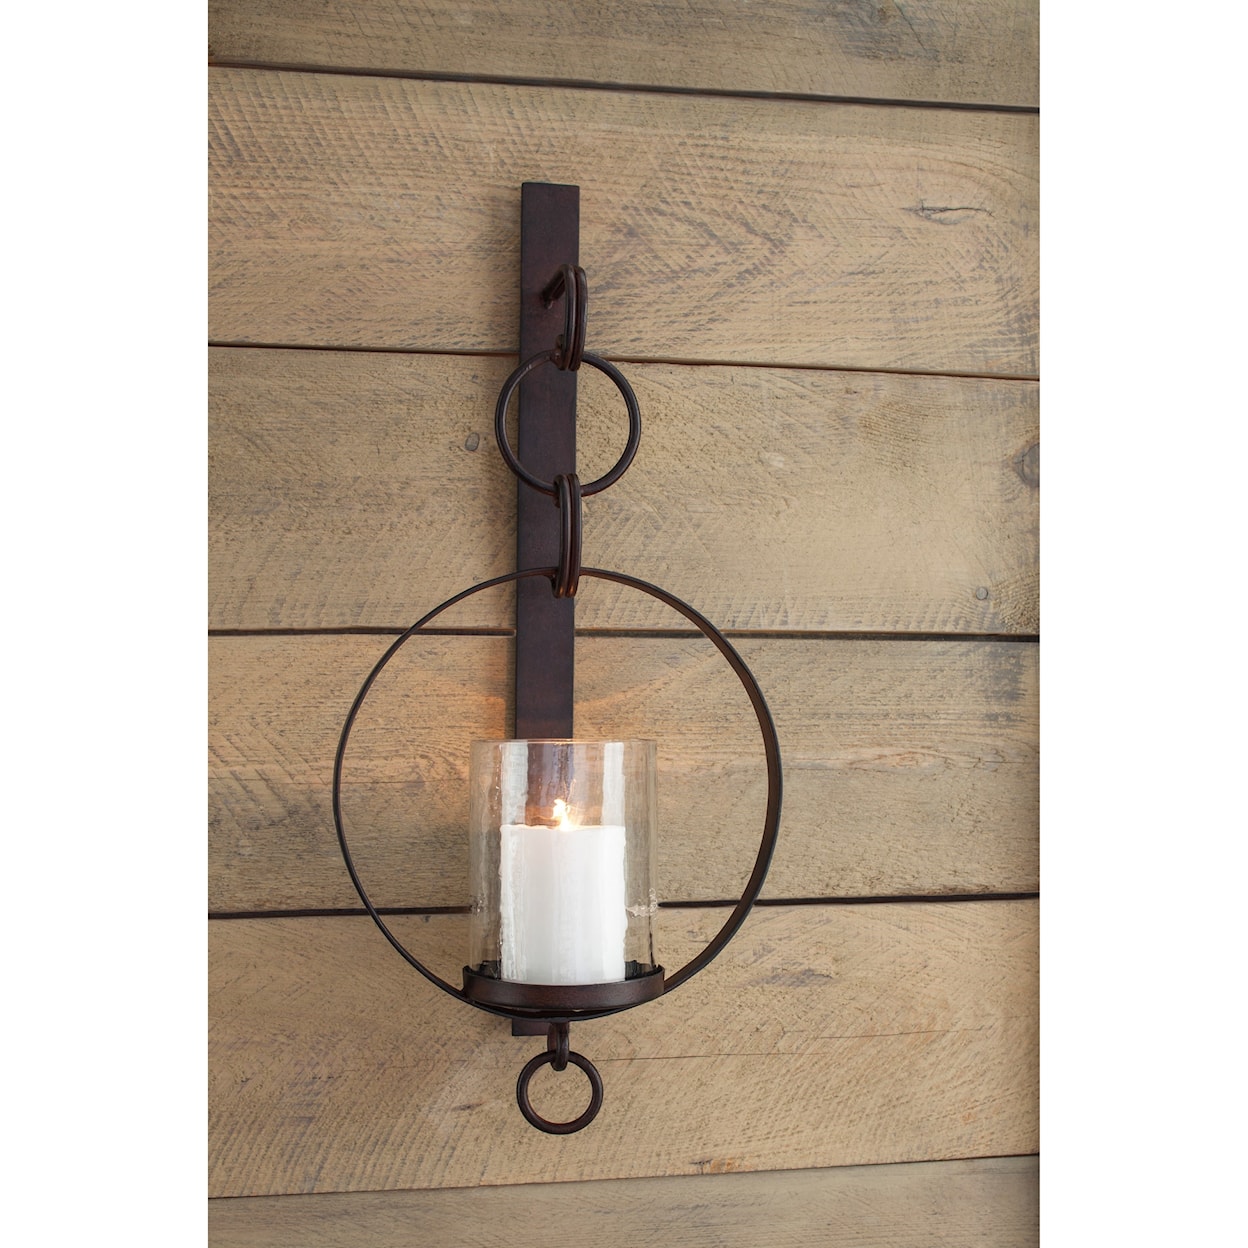 Signature Design by Ashley Wall Art Ogaleesha Brown Wall Sconce